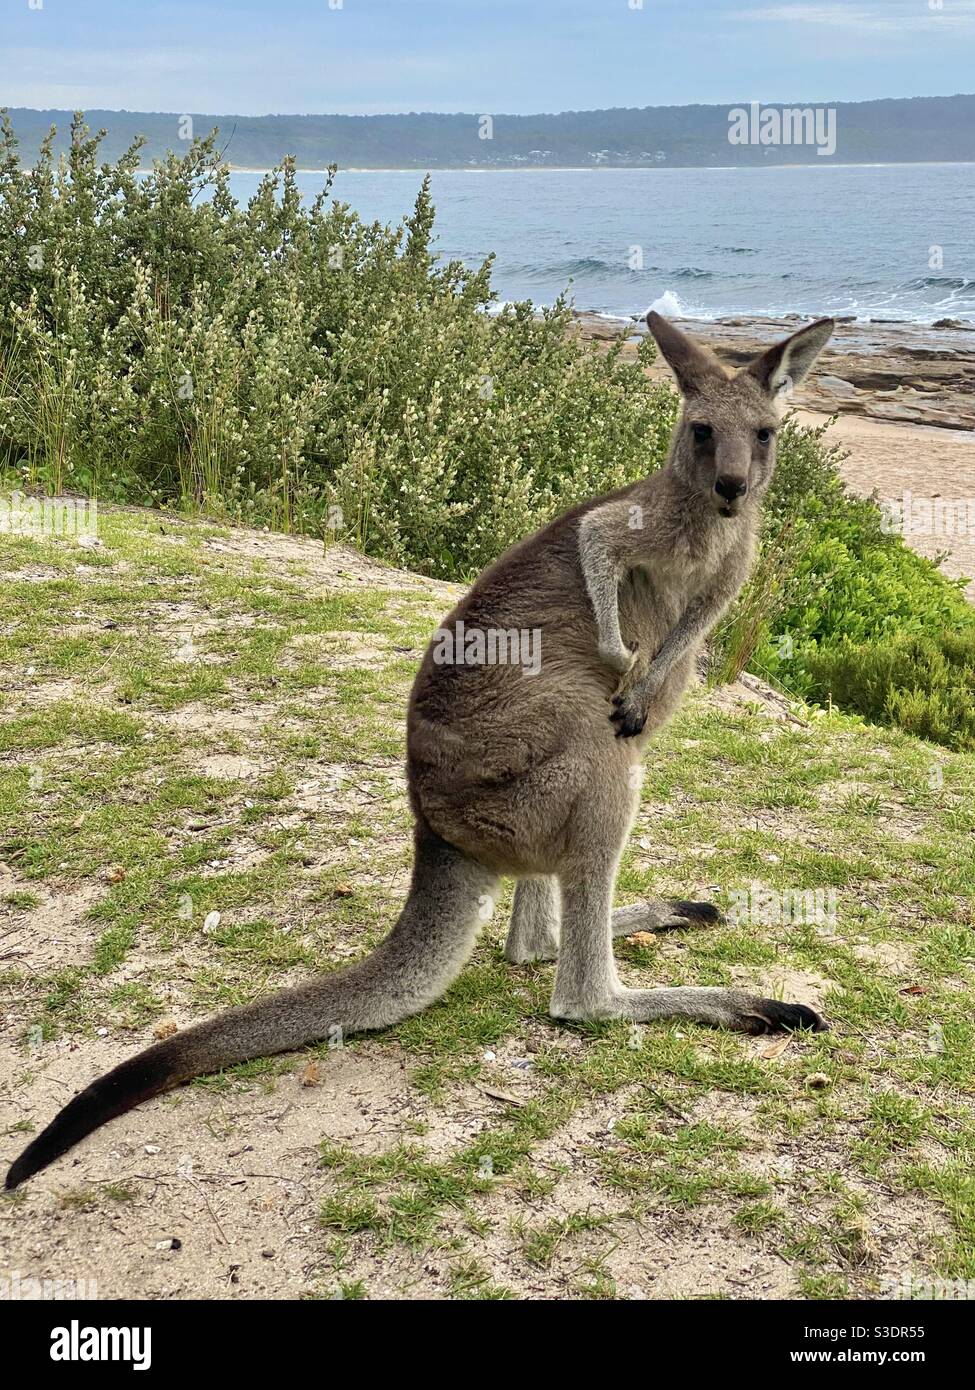 Eastern grey kangaroo standing on grass with beach and ocean in background. Adult kangaroo side on with head turn to camera in coastal setting. Concept Australian tourism, wildlife and travel Stock Photo